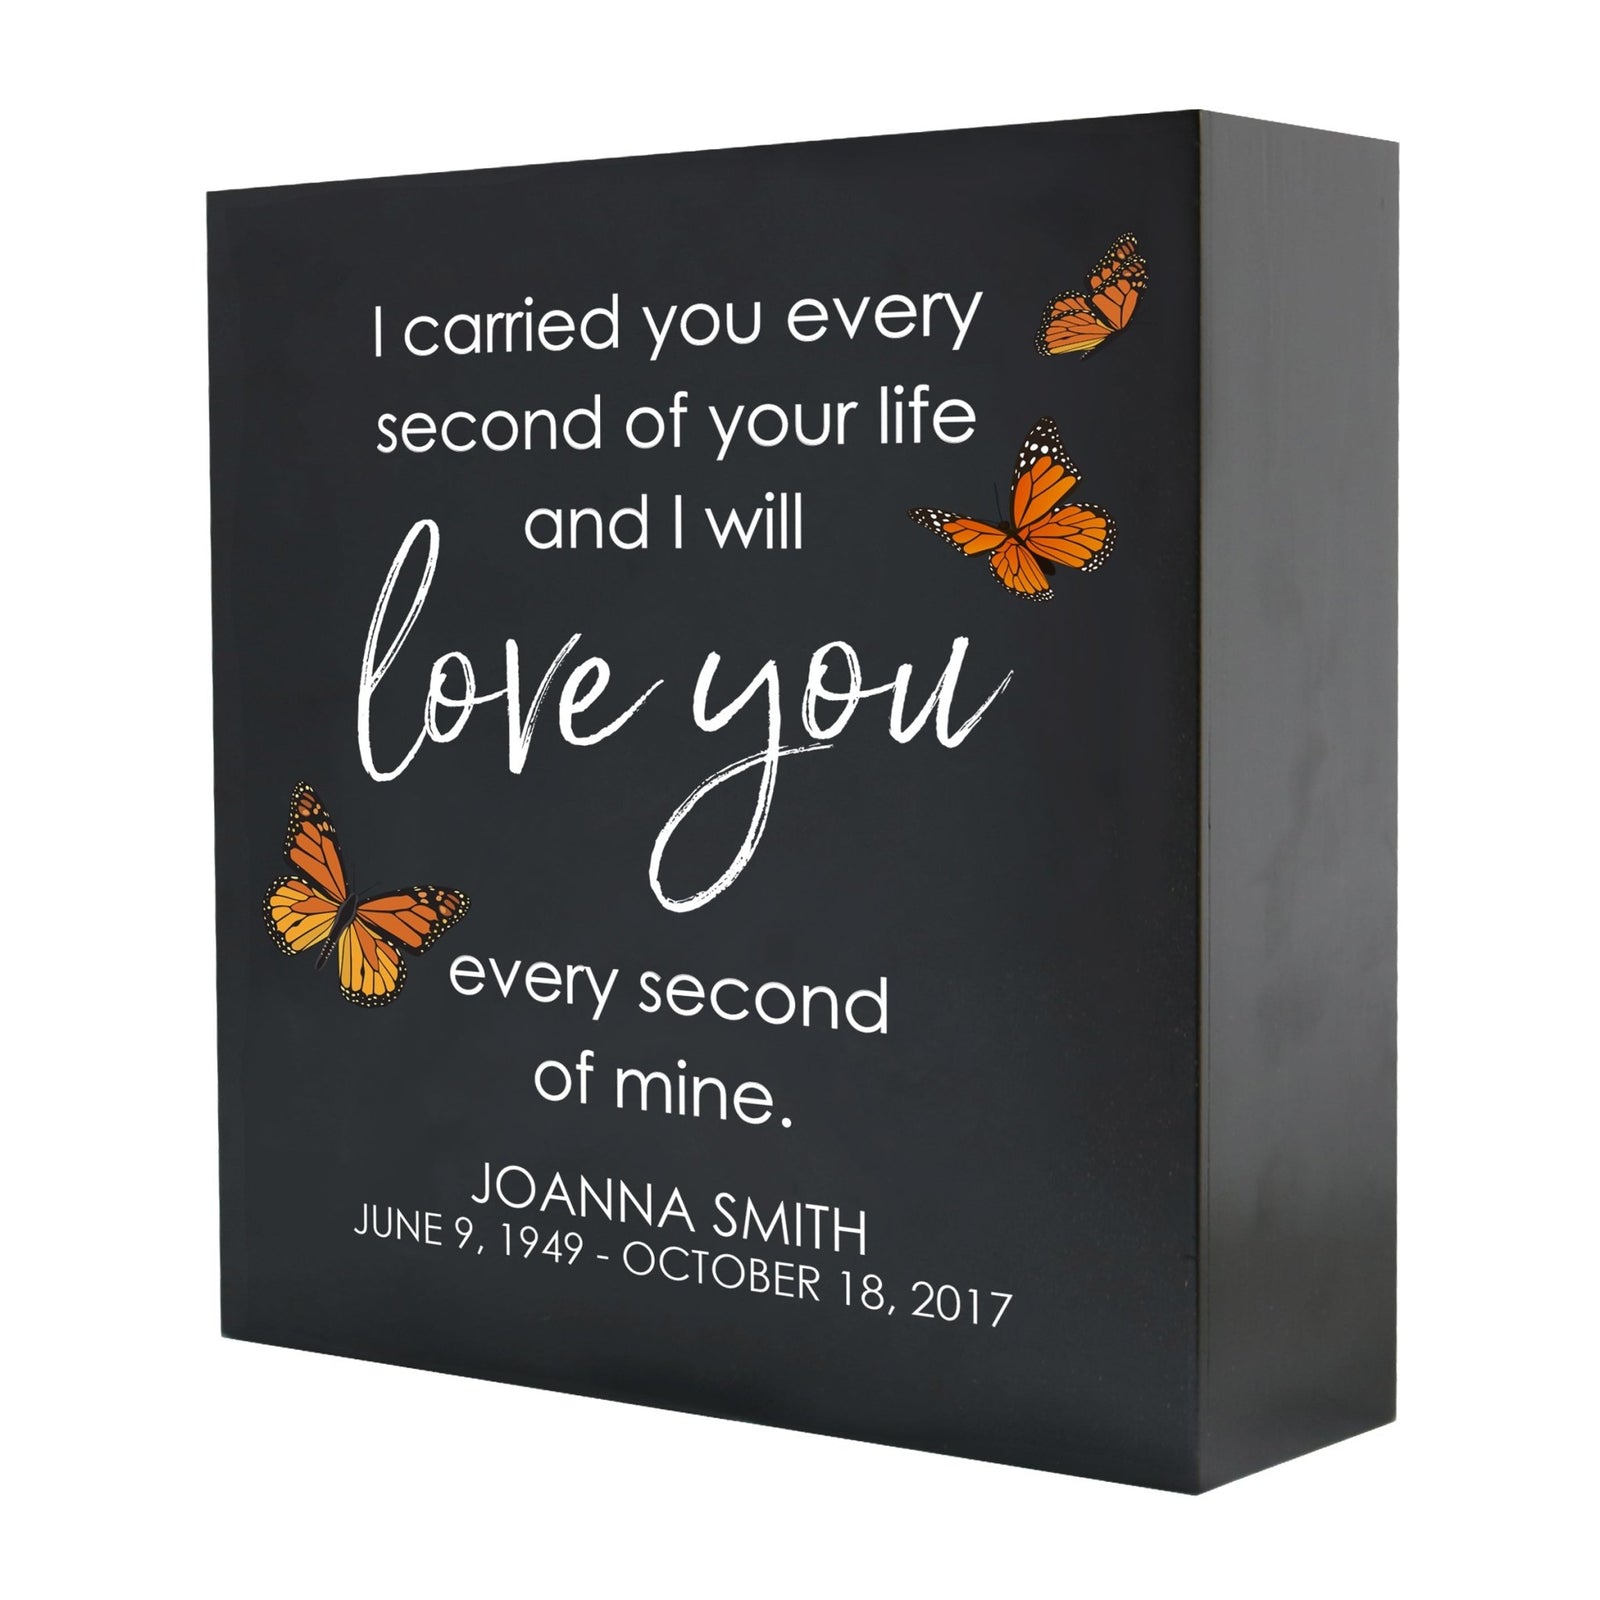 Personalized Modern Inspirational Memorial Wooden Shadow Box and Urn 10x10 holds 189 cu in of Human Ashes - I Carried You Every (Life) - LifeSong Milestones